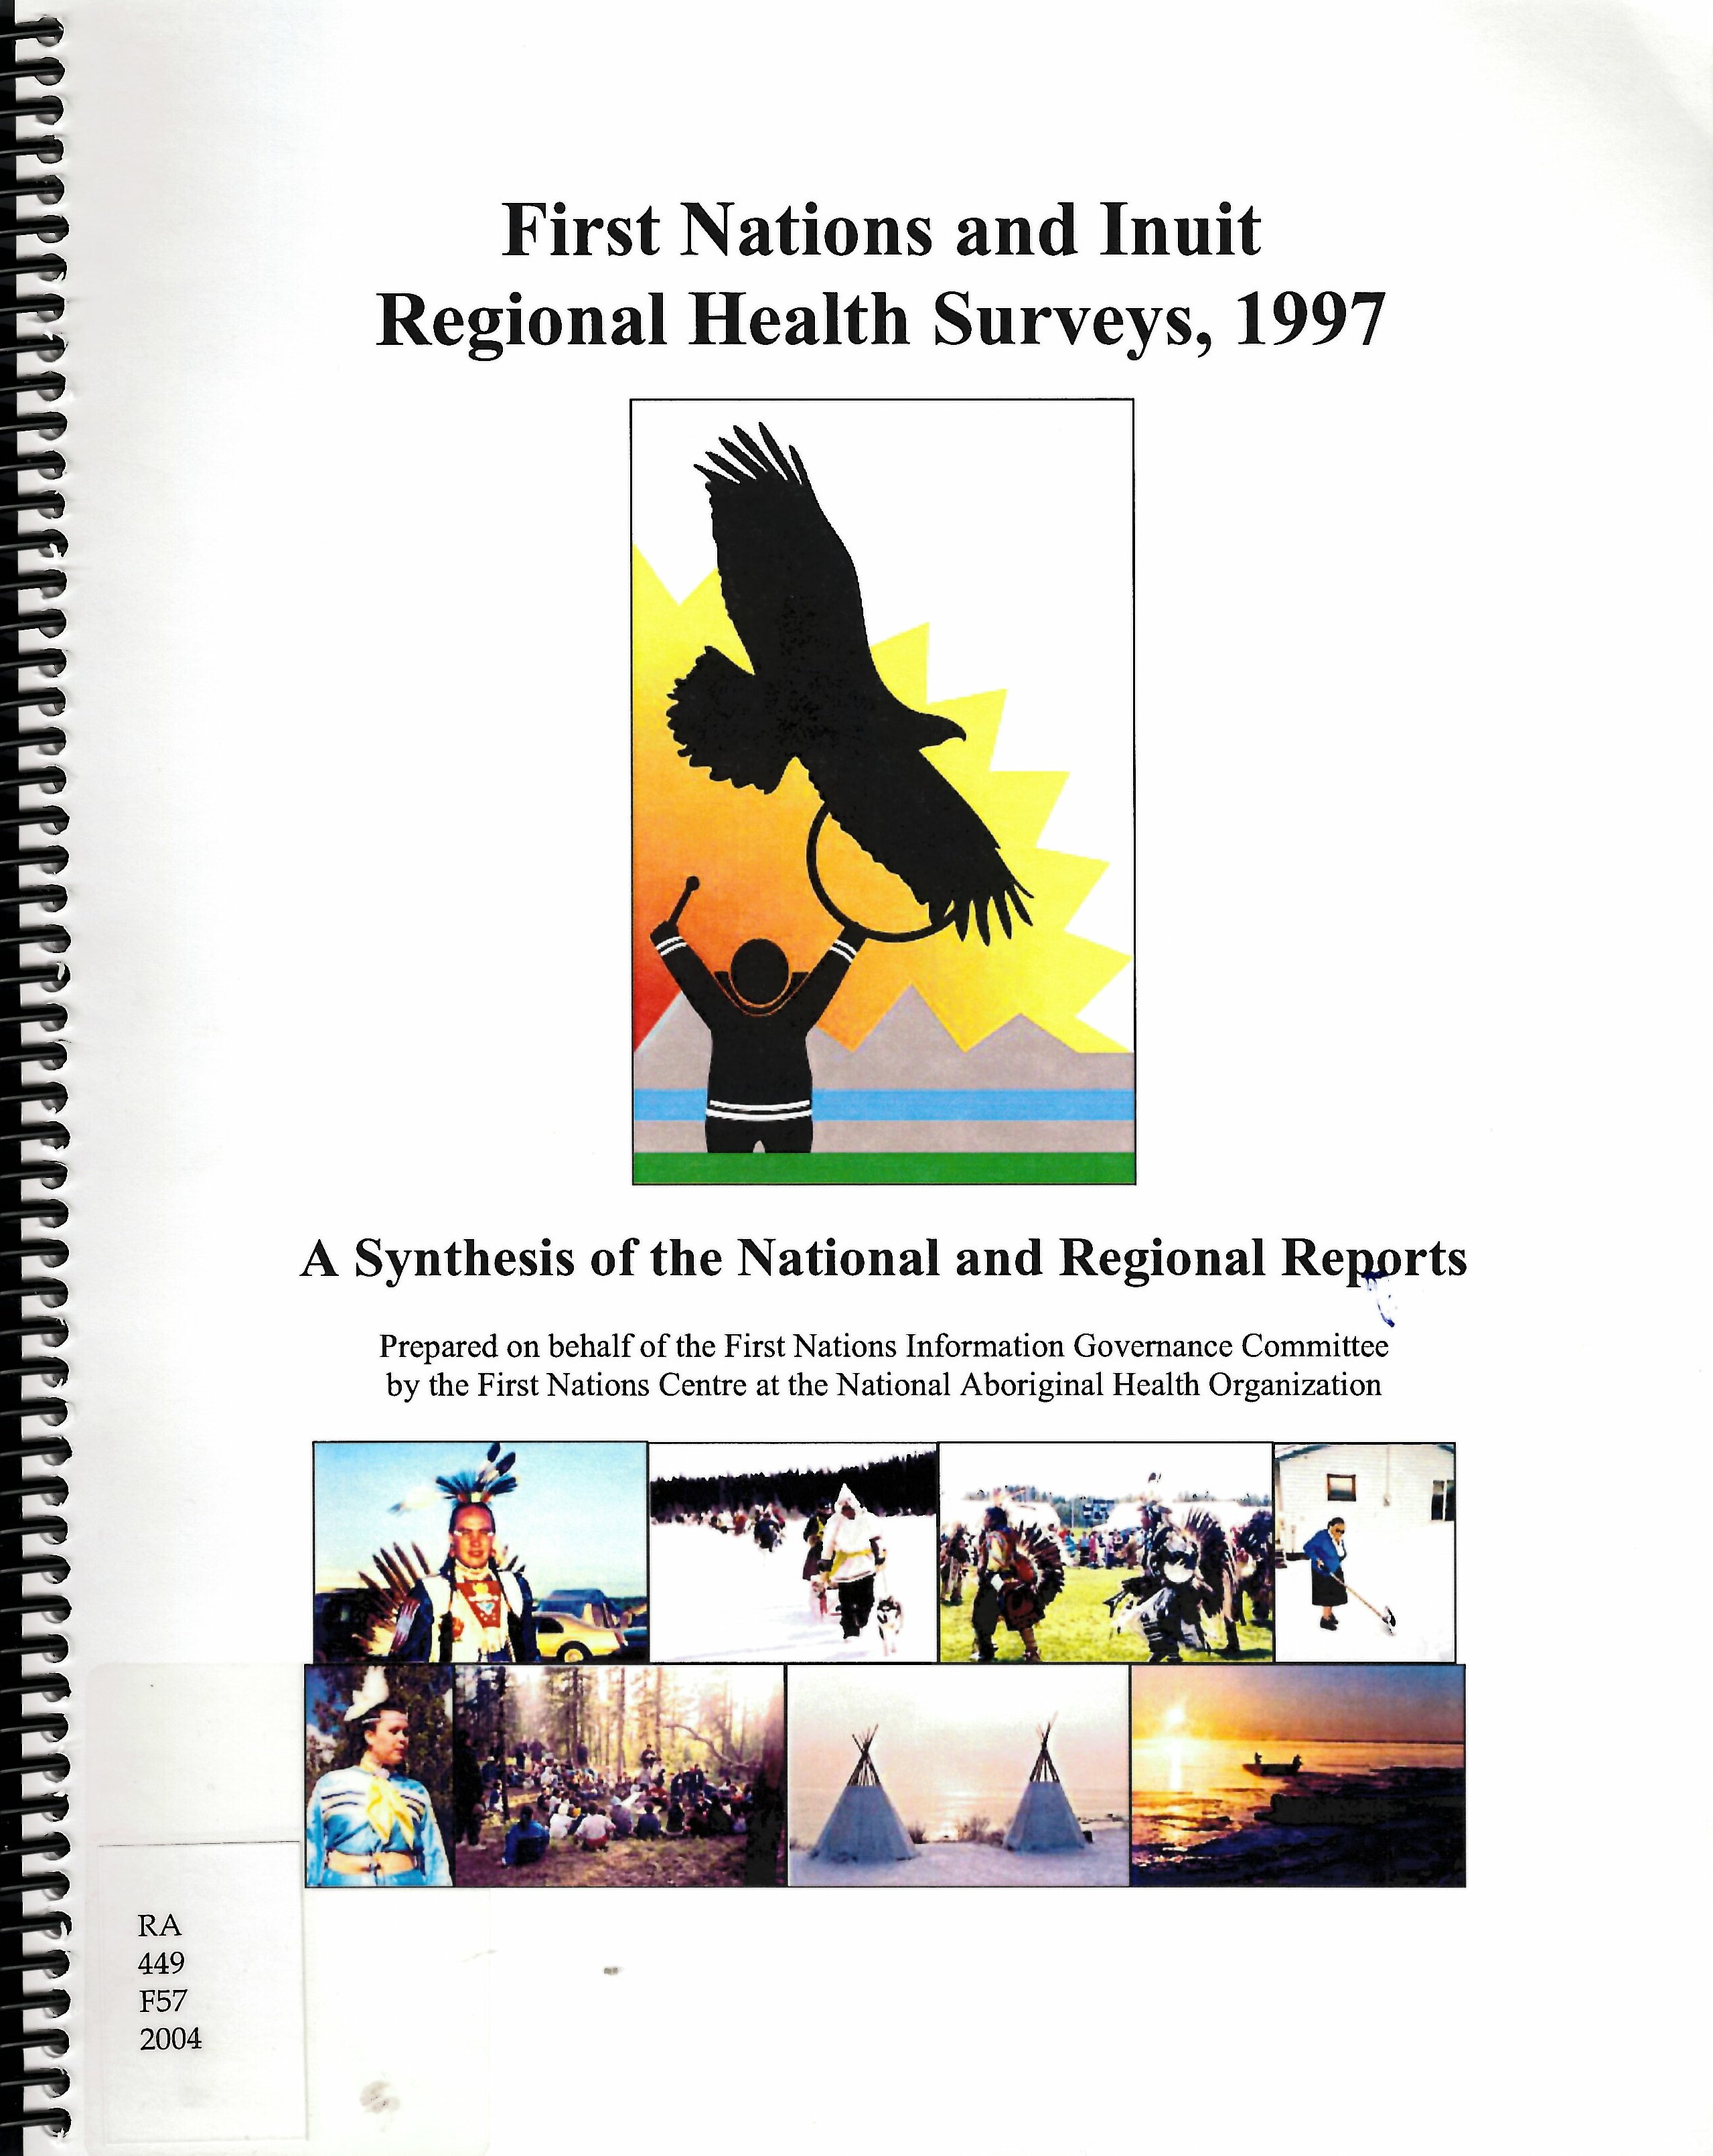 First Nations and Inuit regional health surveys, 1997